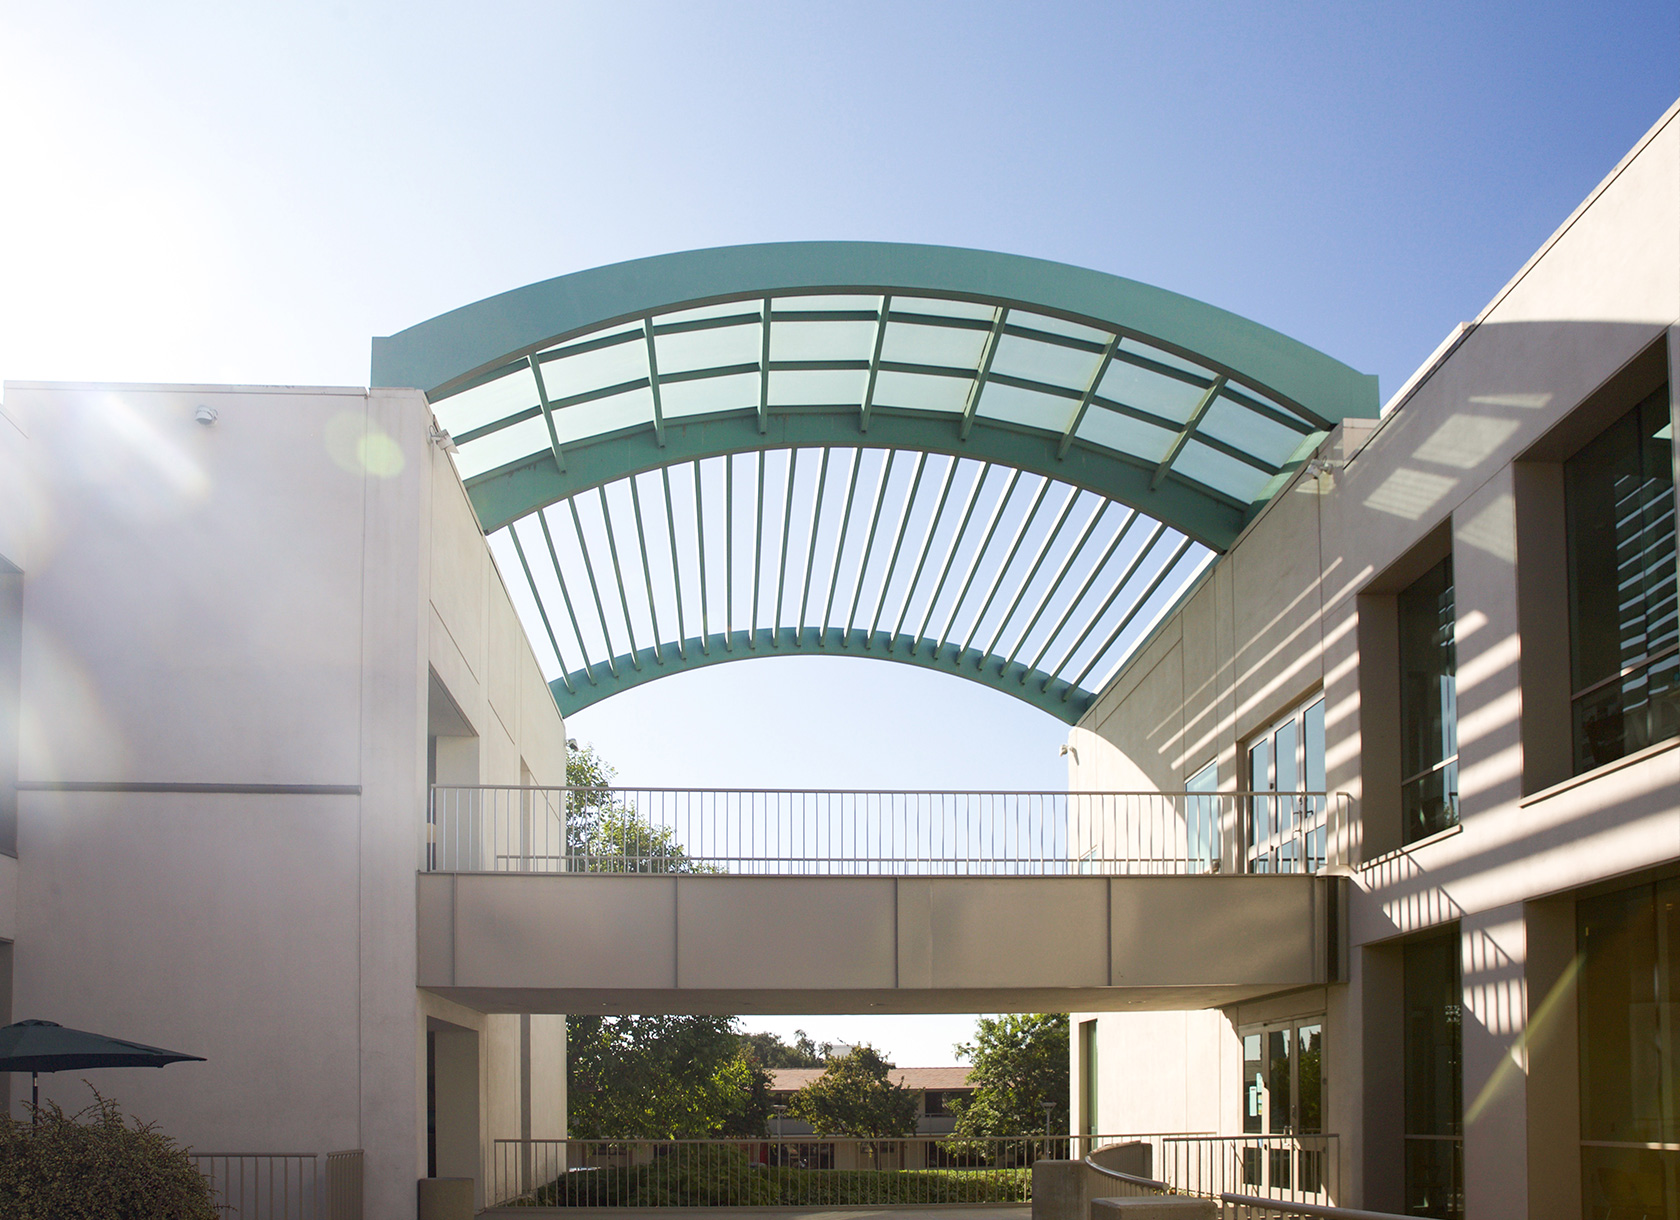 The W.M. Keck Science Center at the Claremont Colleges.